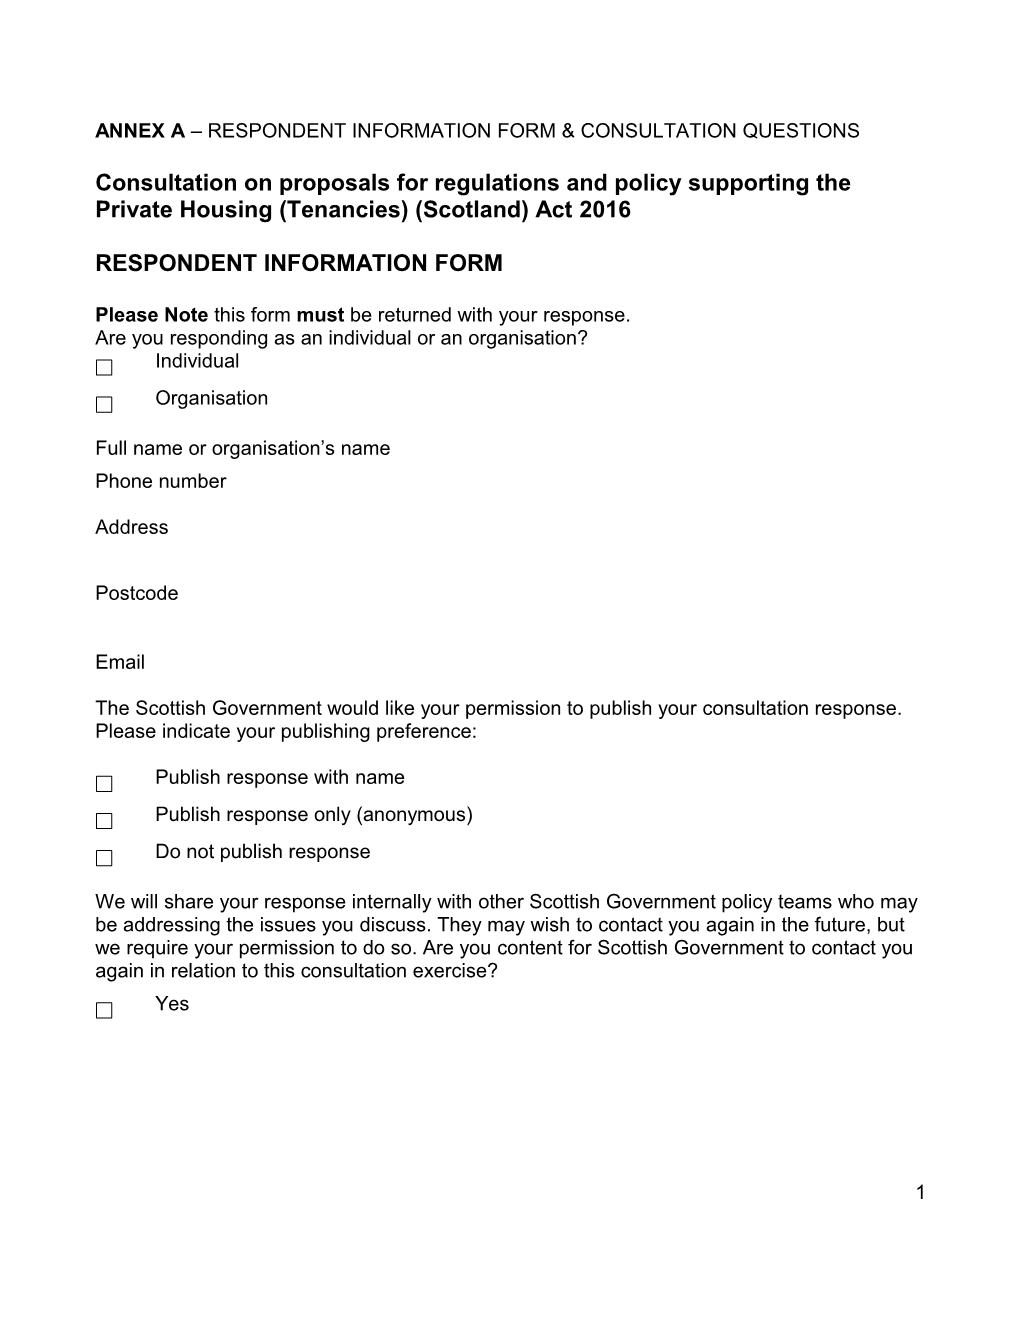 Consultation on Proposals for Regulations and Policy Supporting the Private Housing (Tenancies)